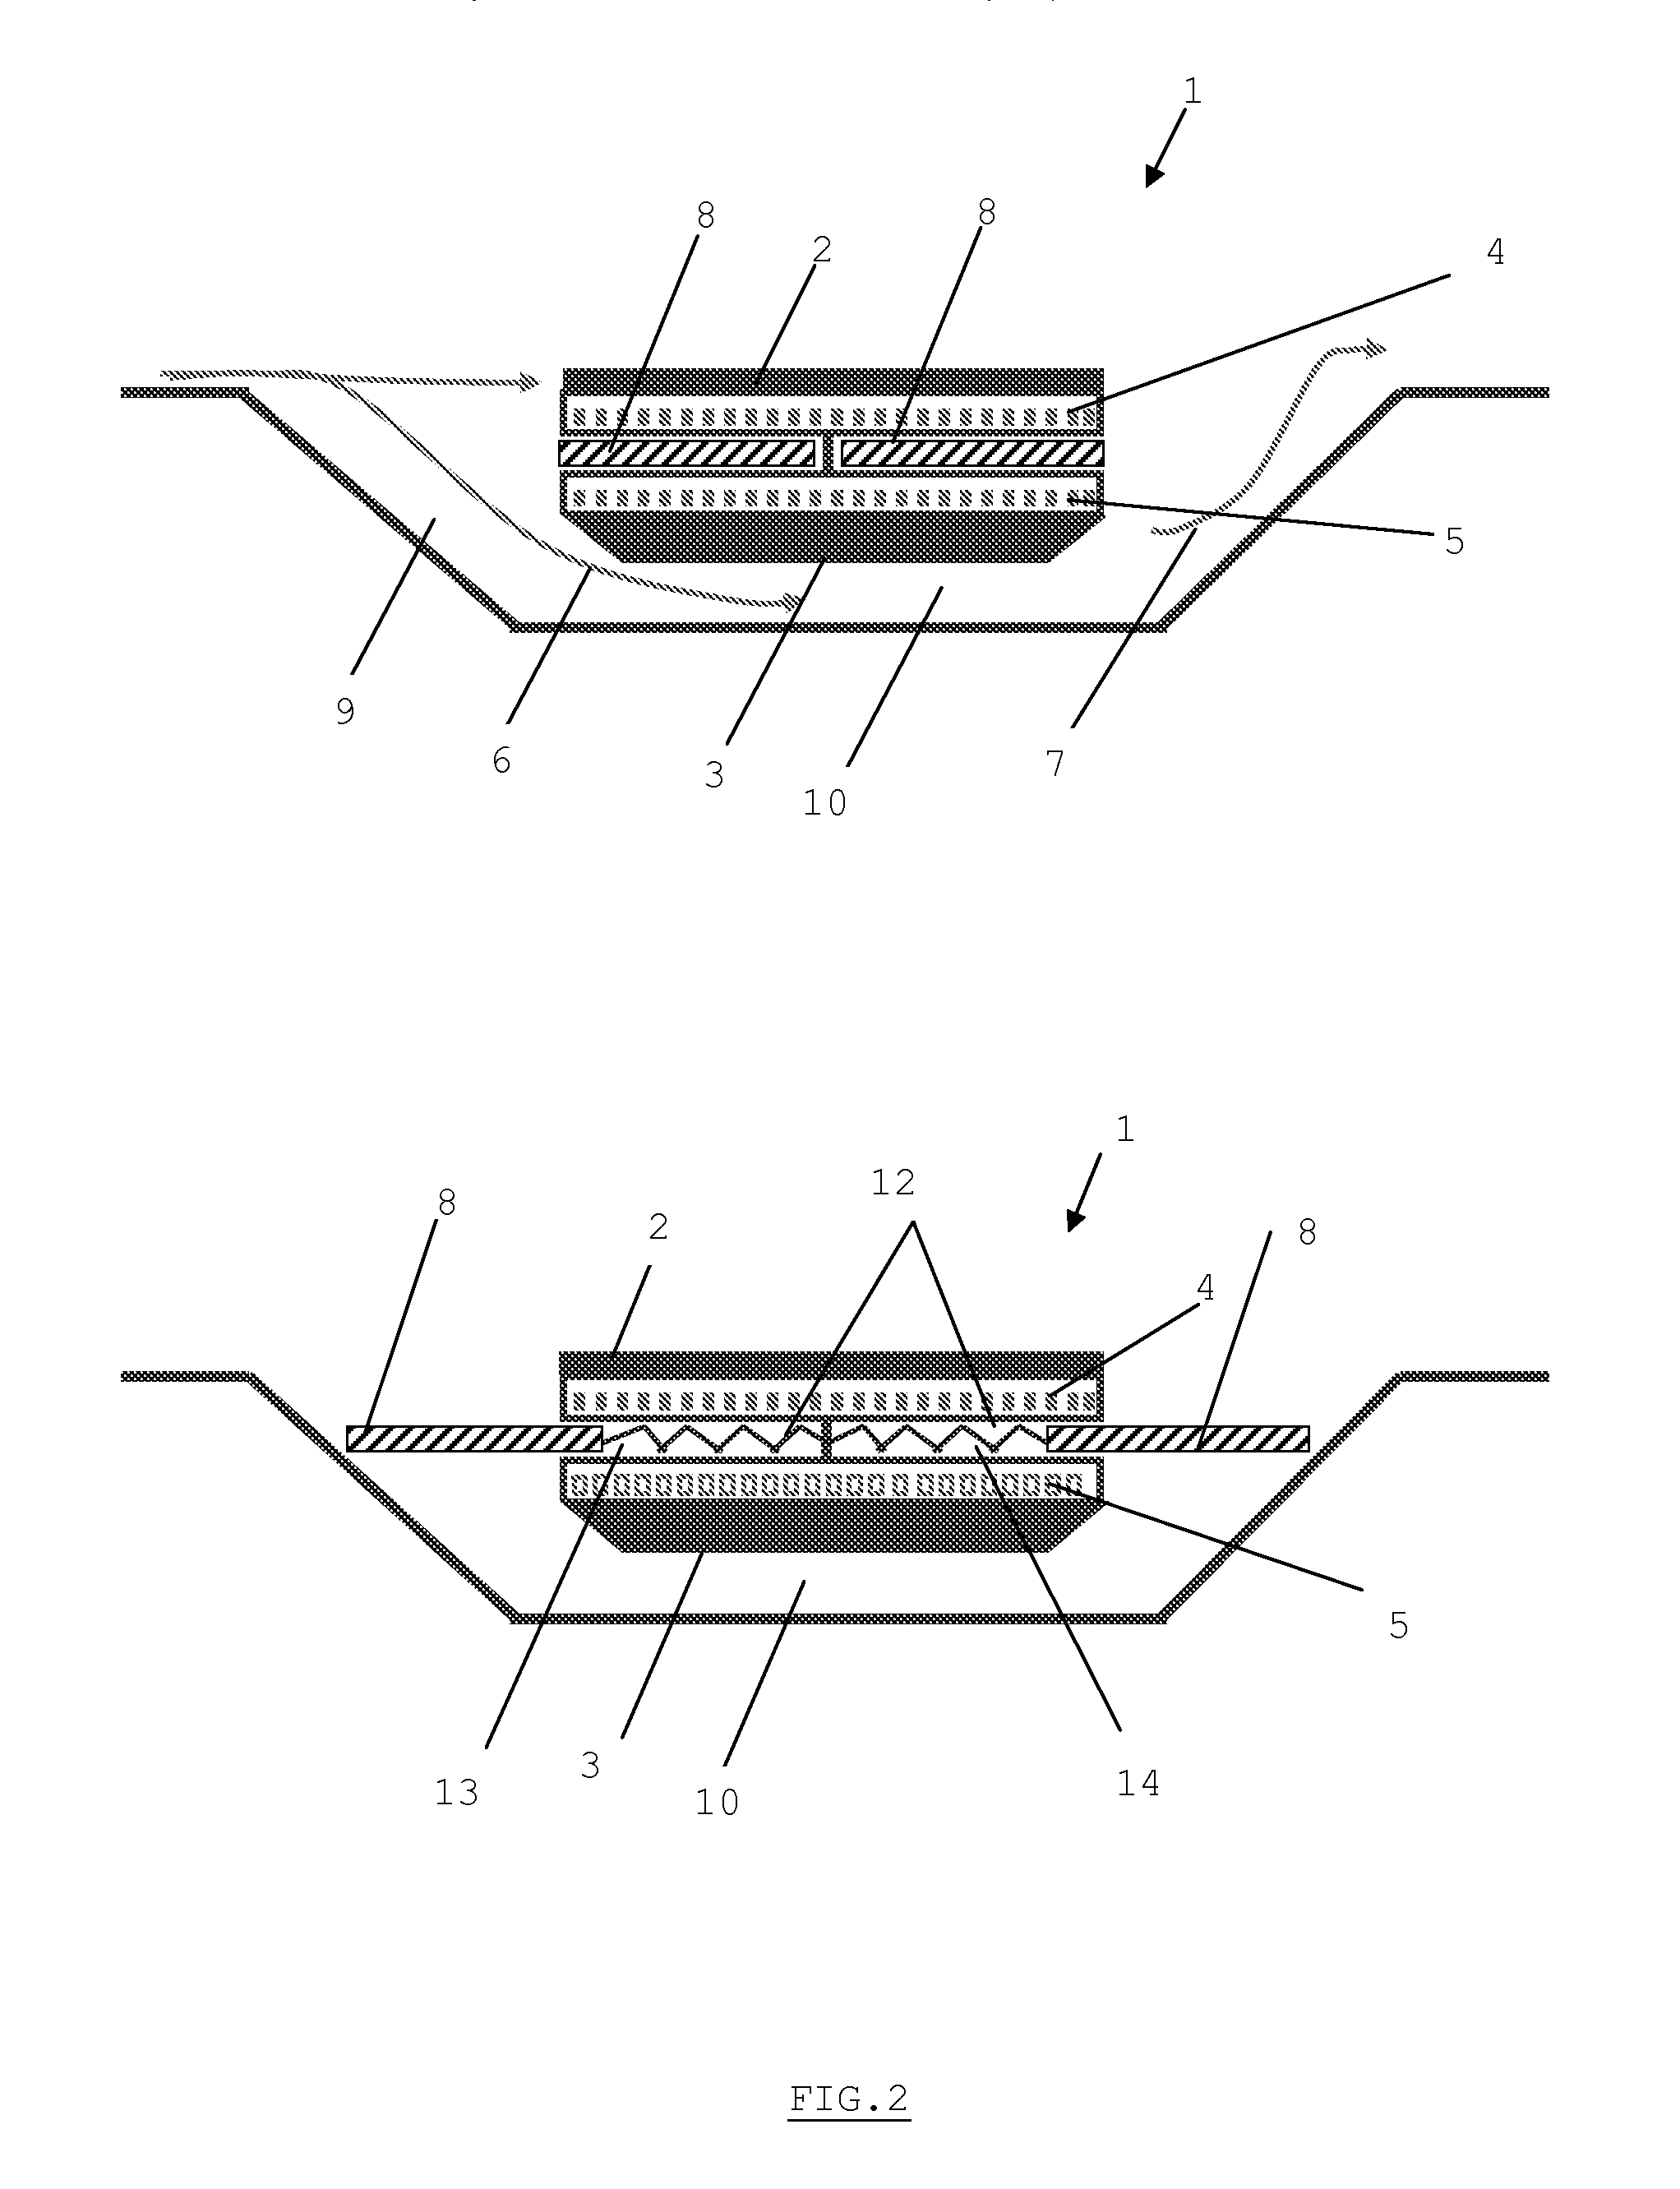 Integration of a surface heat-exchanger with regulated air flow in an airplane engine